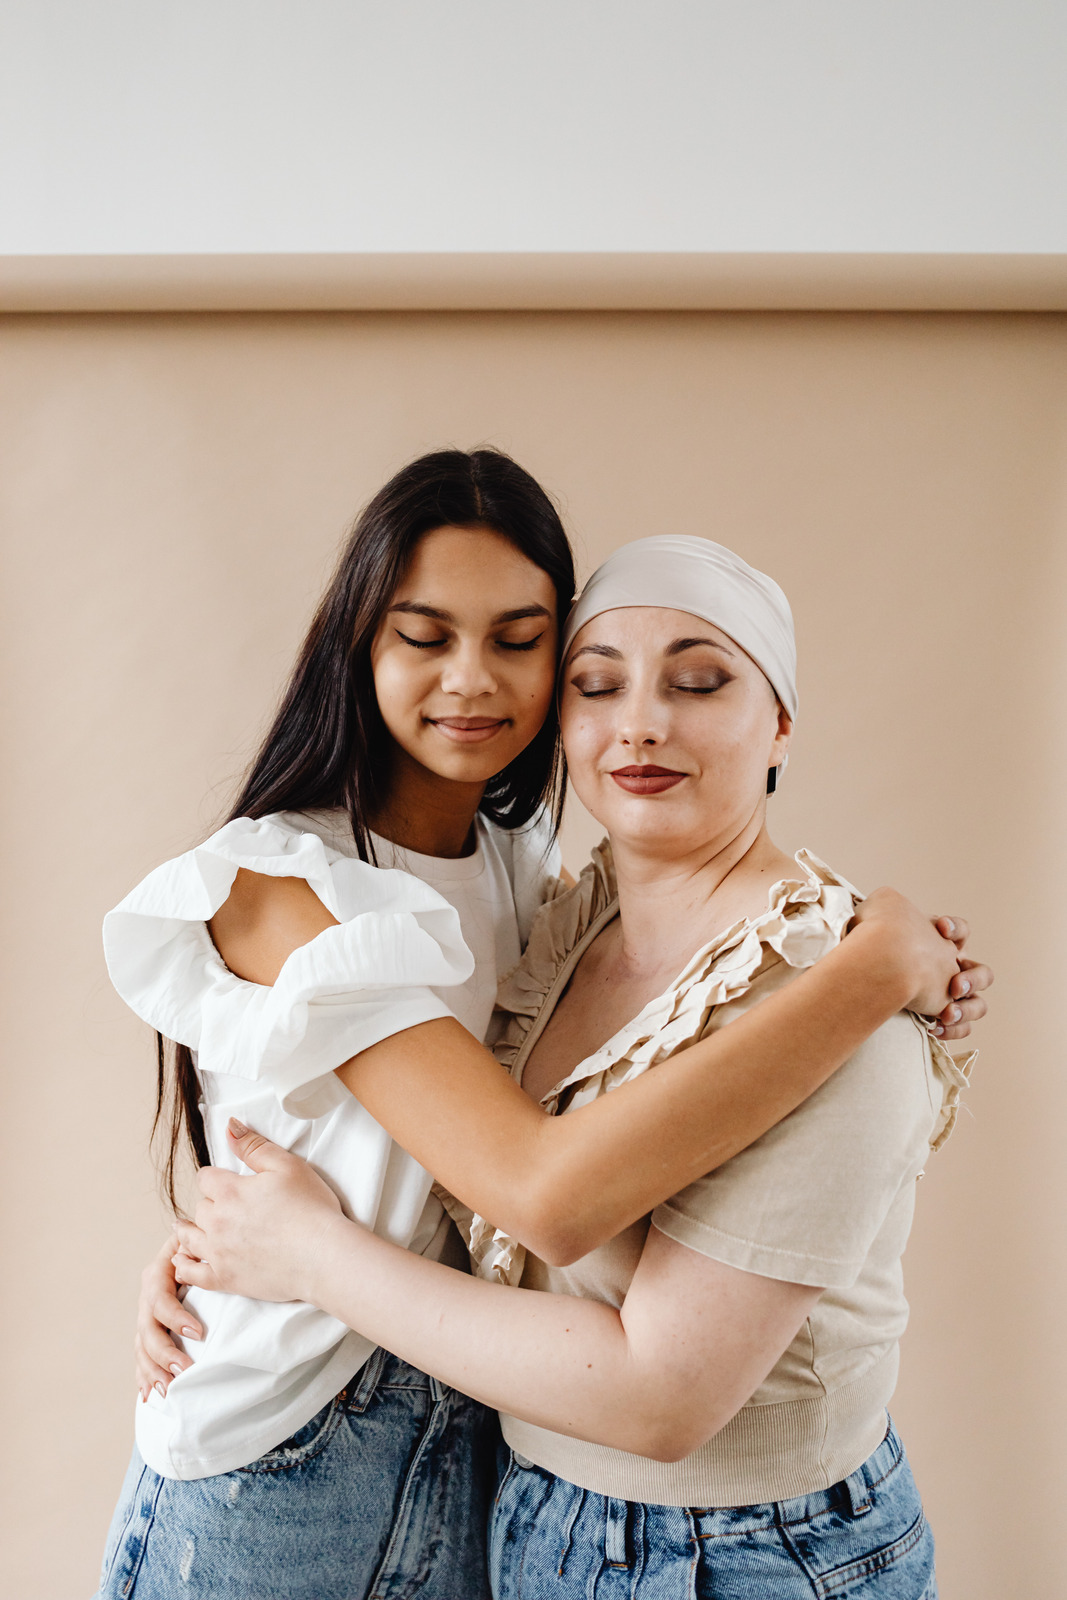 Two Women Hugging Each Other Photos By Canva 